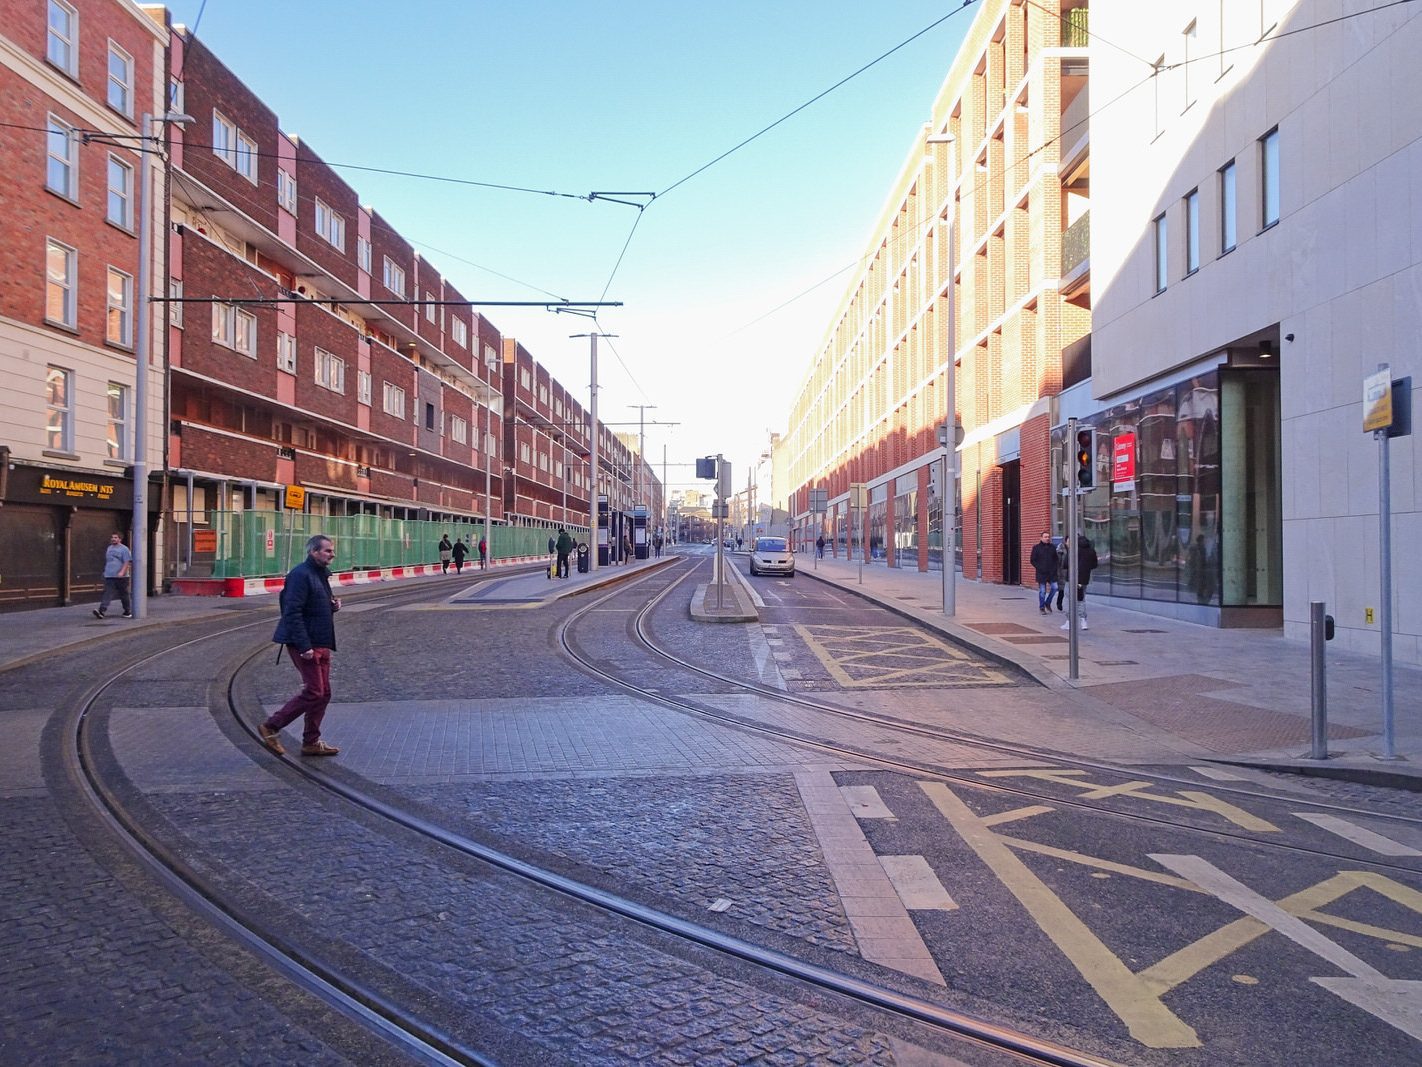 I USUALLY AVOID THE DOMINICK STREET LUAS TRAM STOP 001